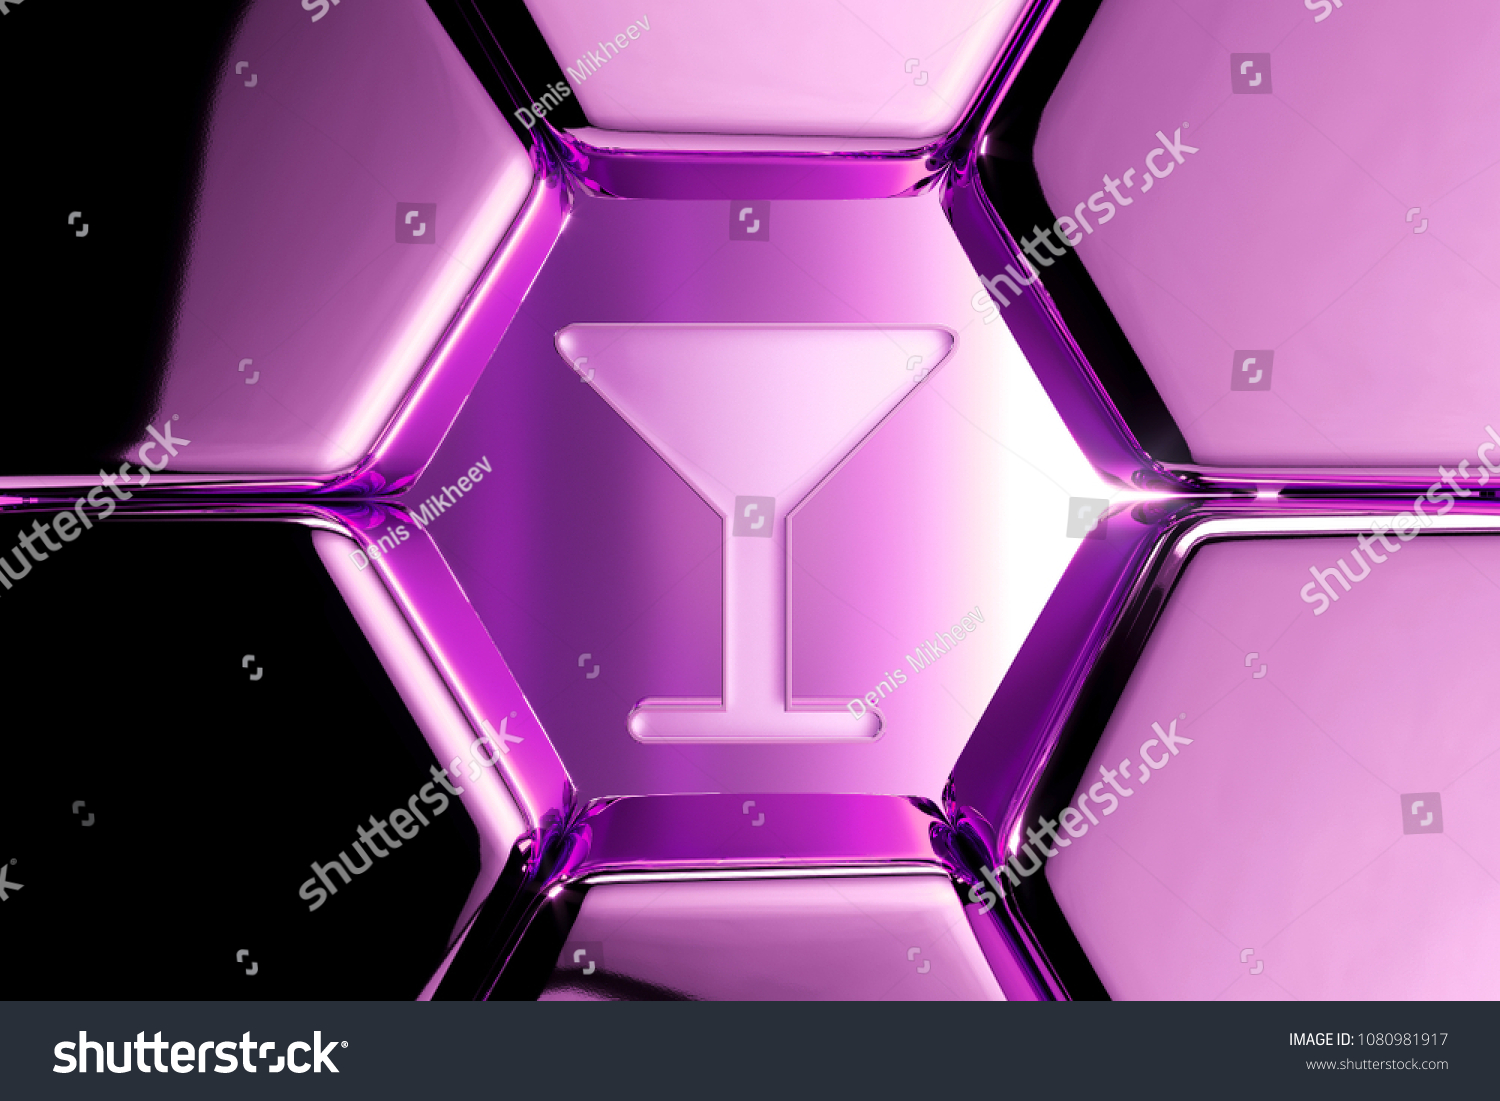 Metallic Magenta Martini Glass Icon in the Luxury Honeycomb. 3D Illustration of Magenta Alcohol, Cocktail, Glass Icons on Magenta Geometric Hexagon Pattern. #1080981917